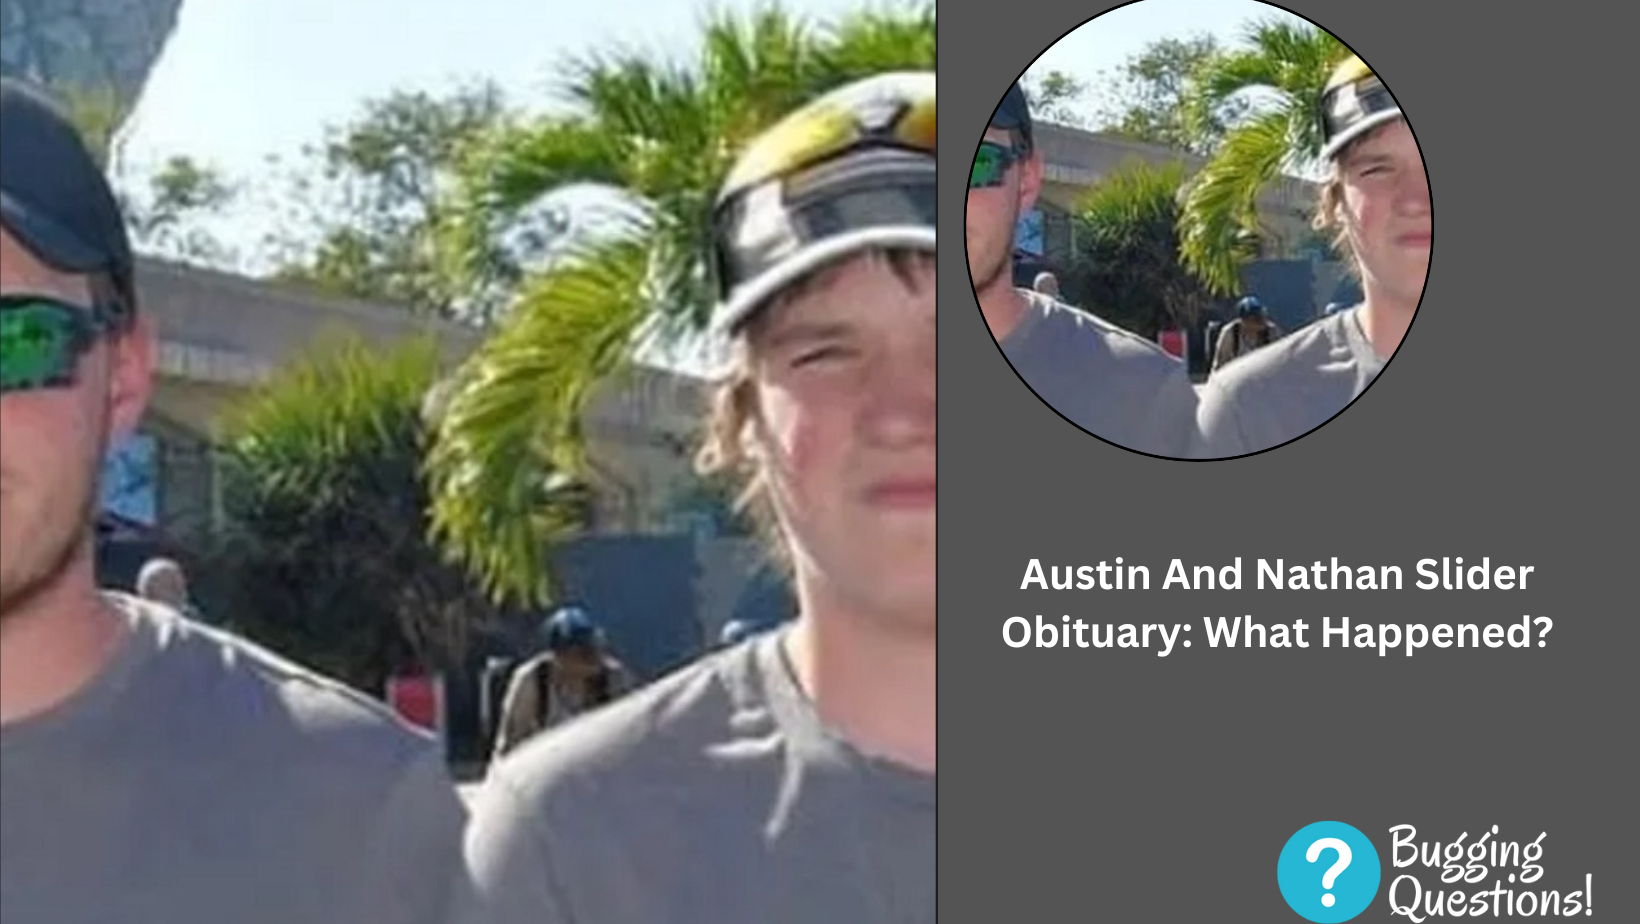 Austin And Nathan Slider Obituary: What Happened?